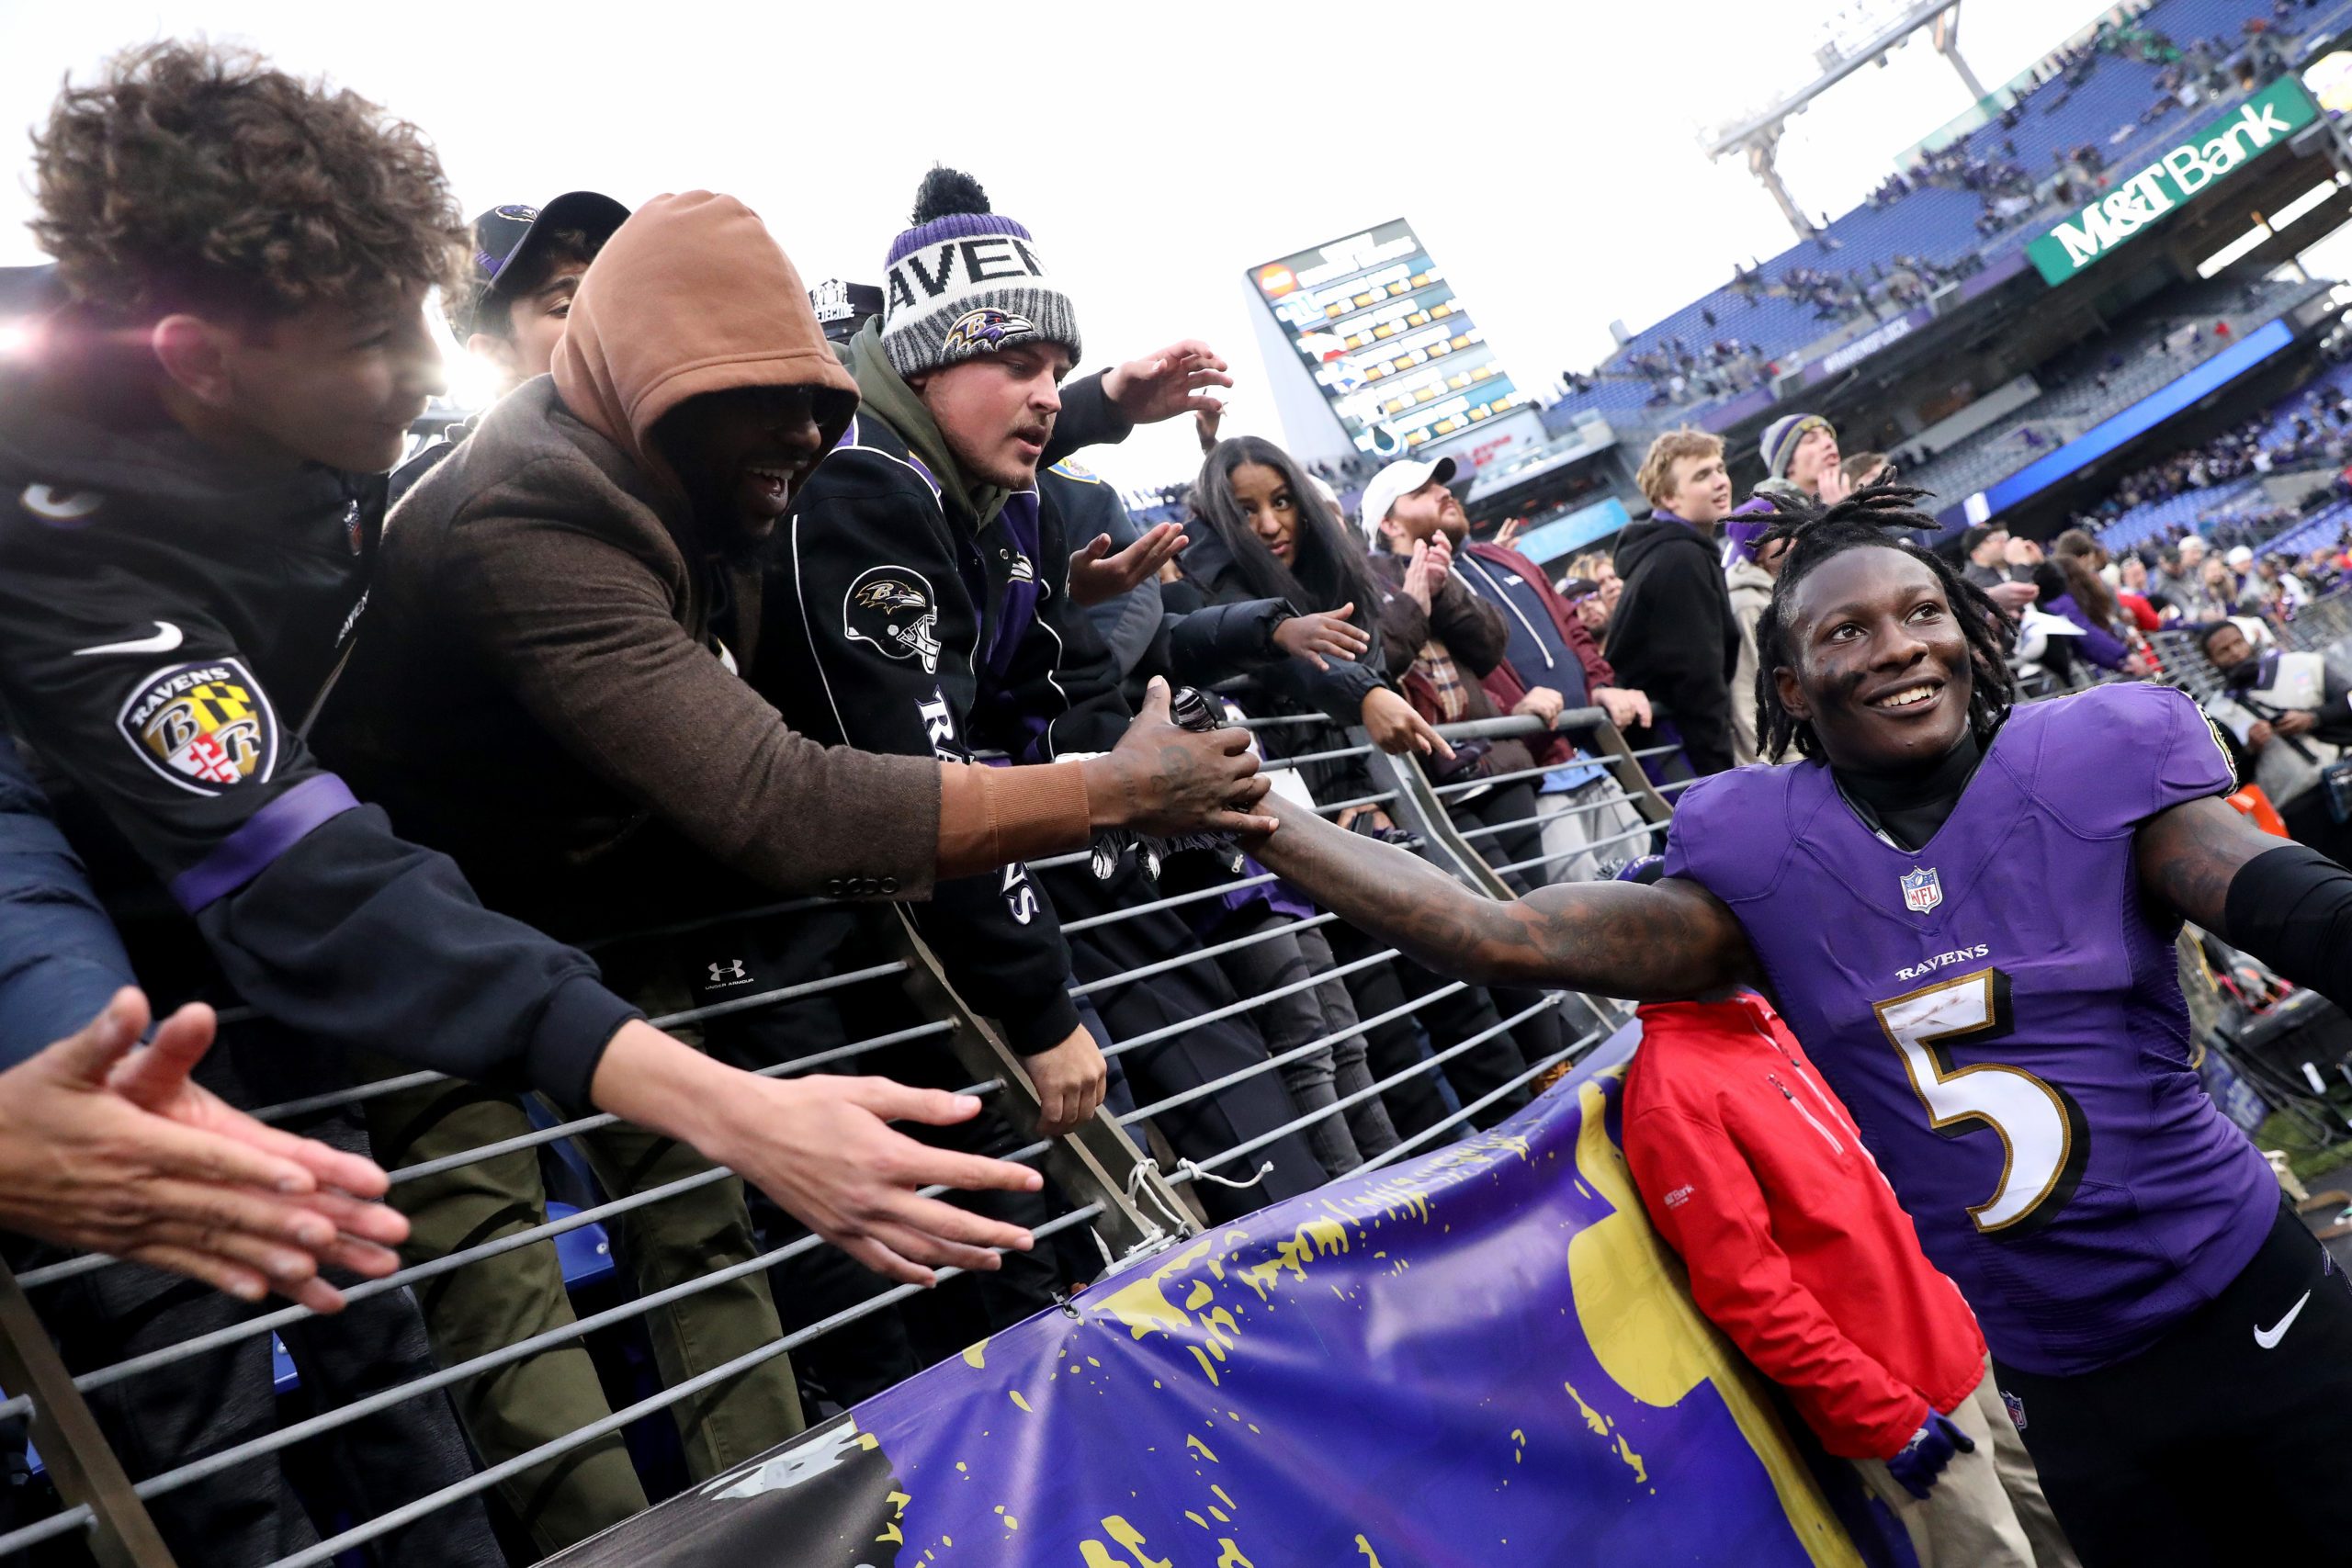 BALTIMORE, MARYLAND - NOVEMBER 07: Marquise Brown #5 of the Baltimore Ravens high fives with fans after their overtime win against the Minnesota Vikings at M&T Bank Stadium on November 07, 2021 in Baltimore, Maryland. (Photo by Todd Olszewski/Getty Images)